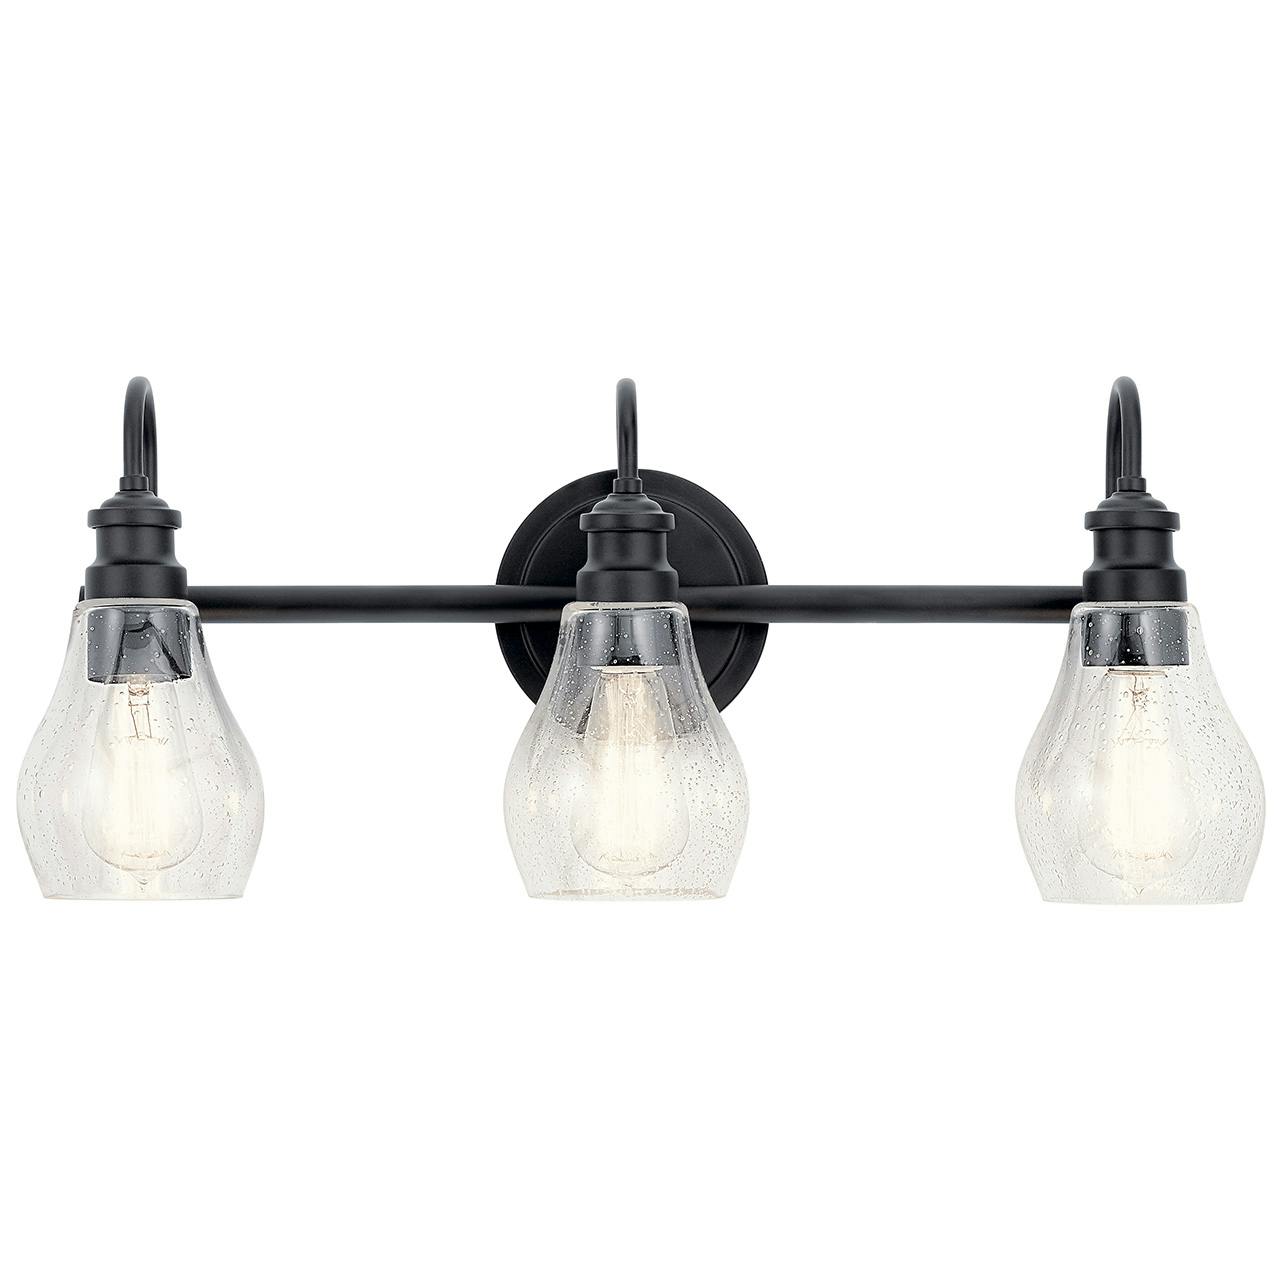 The Greenbrier™ 3 Light Vanity Light Black facing down on a white background